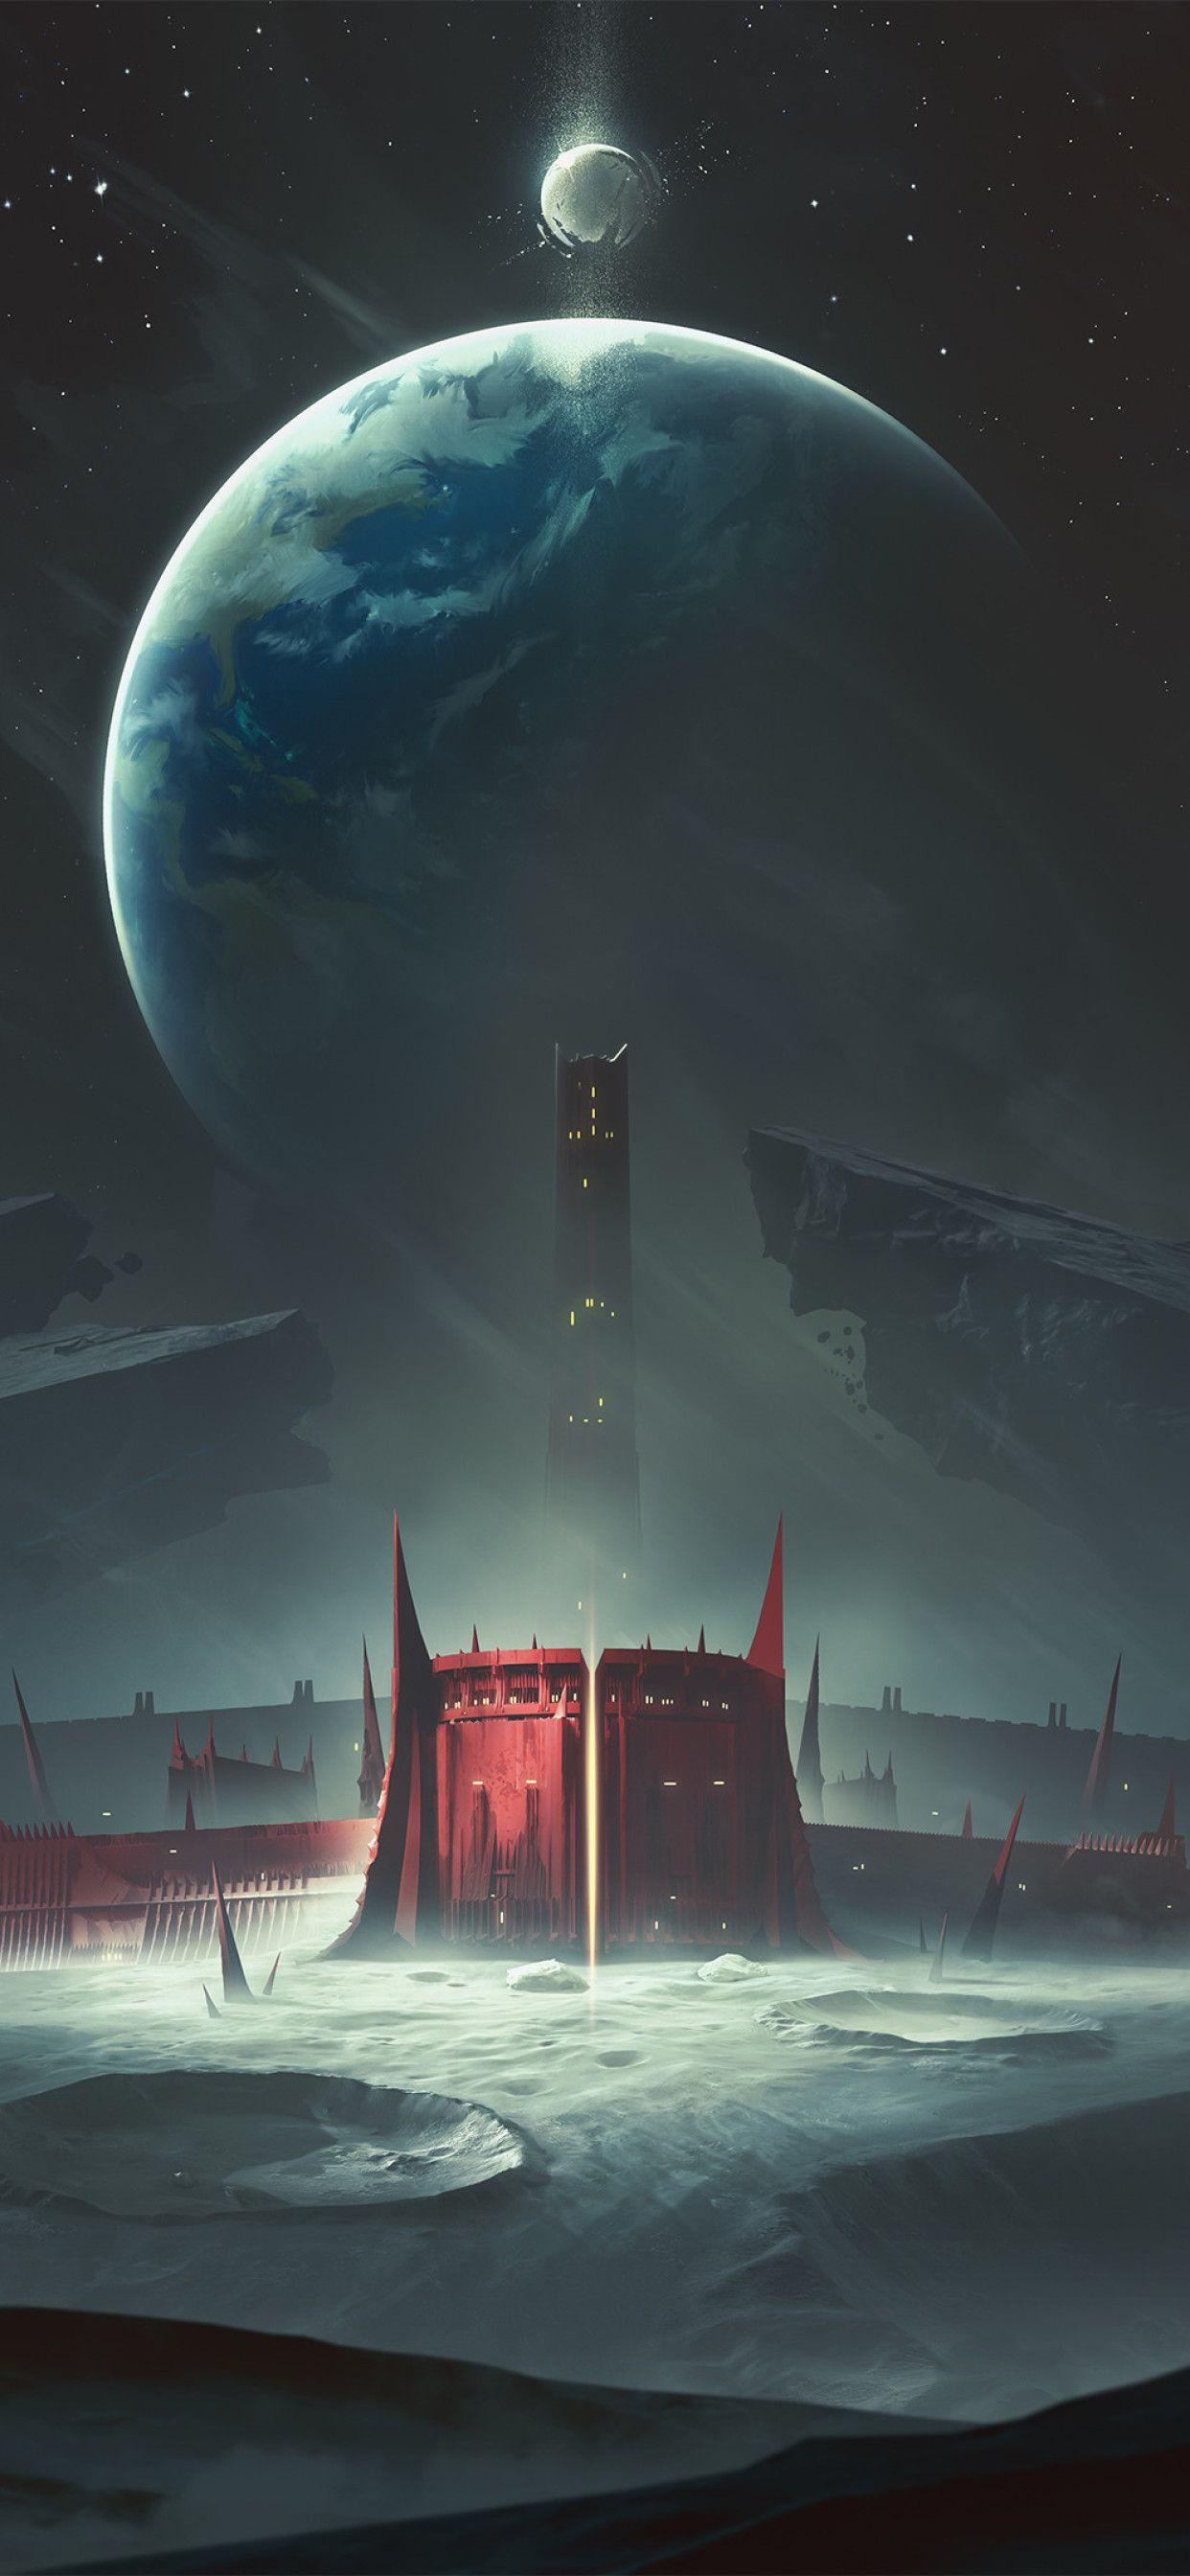 WitchQueen iPhone Wallpaper I Made from Different Images I Merged  r destiny2